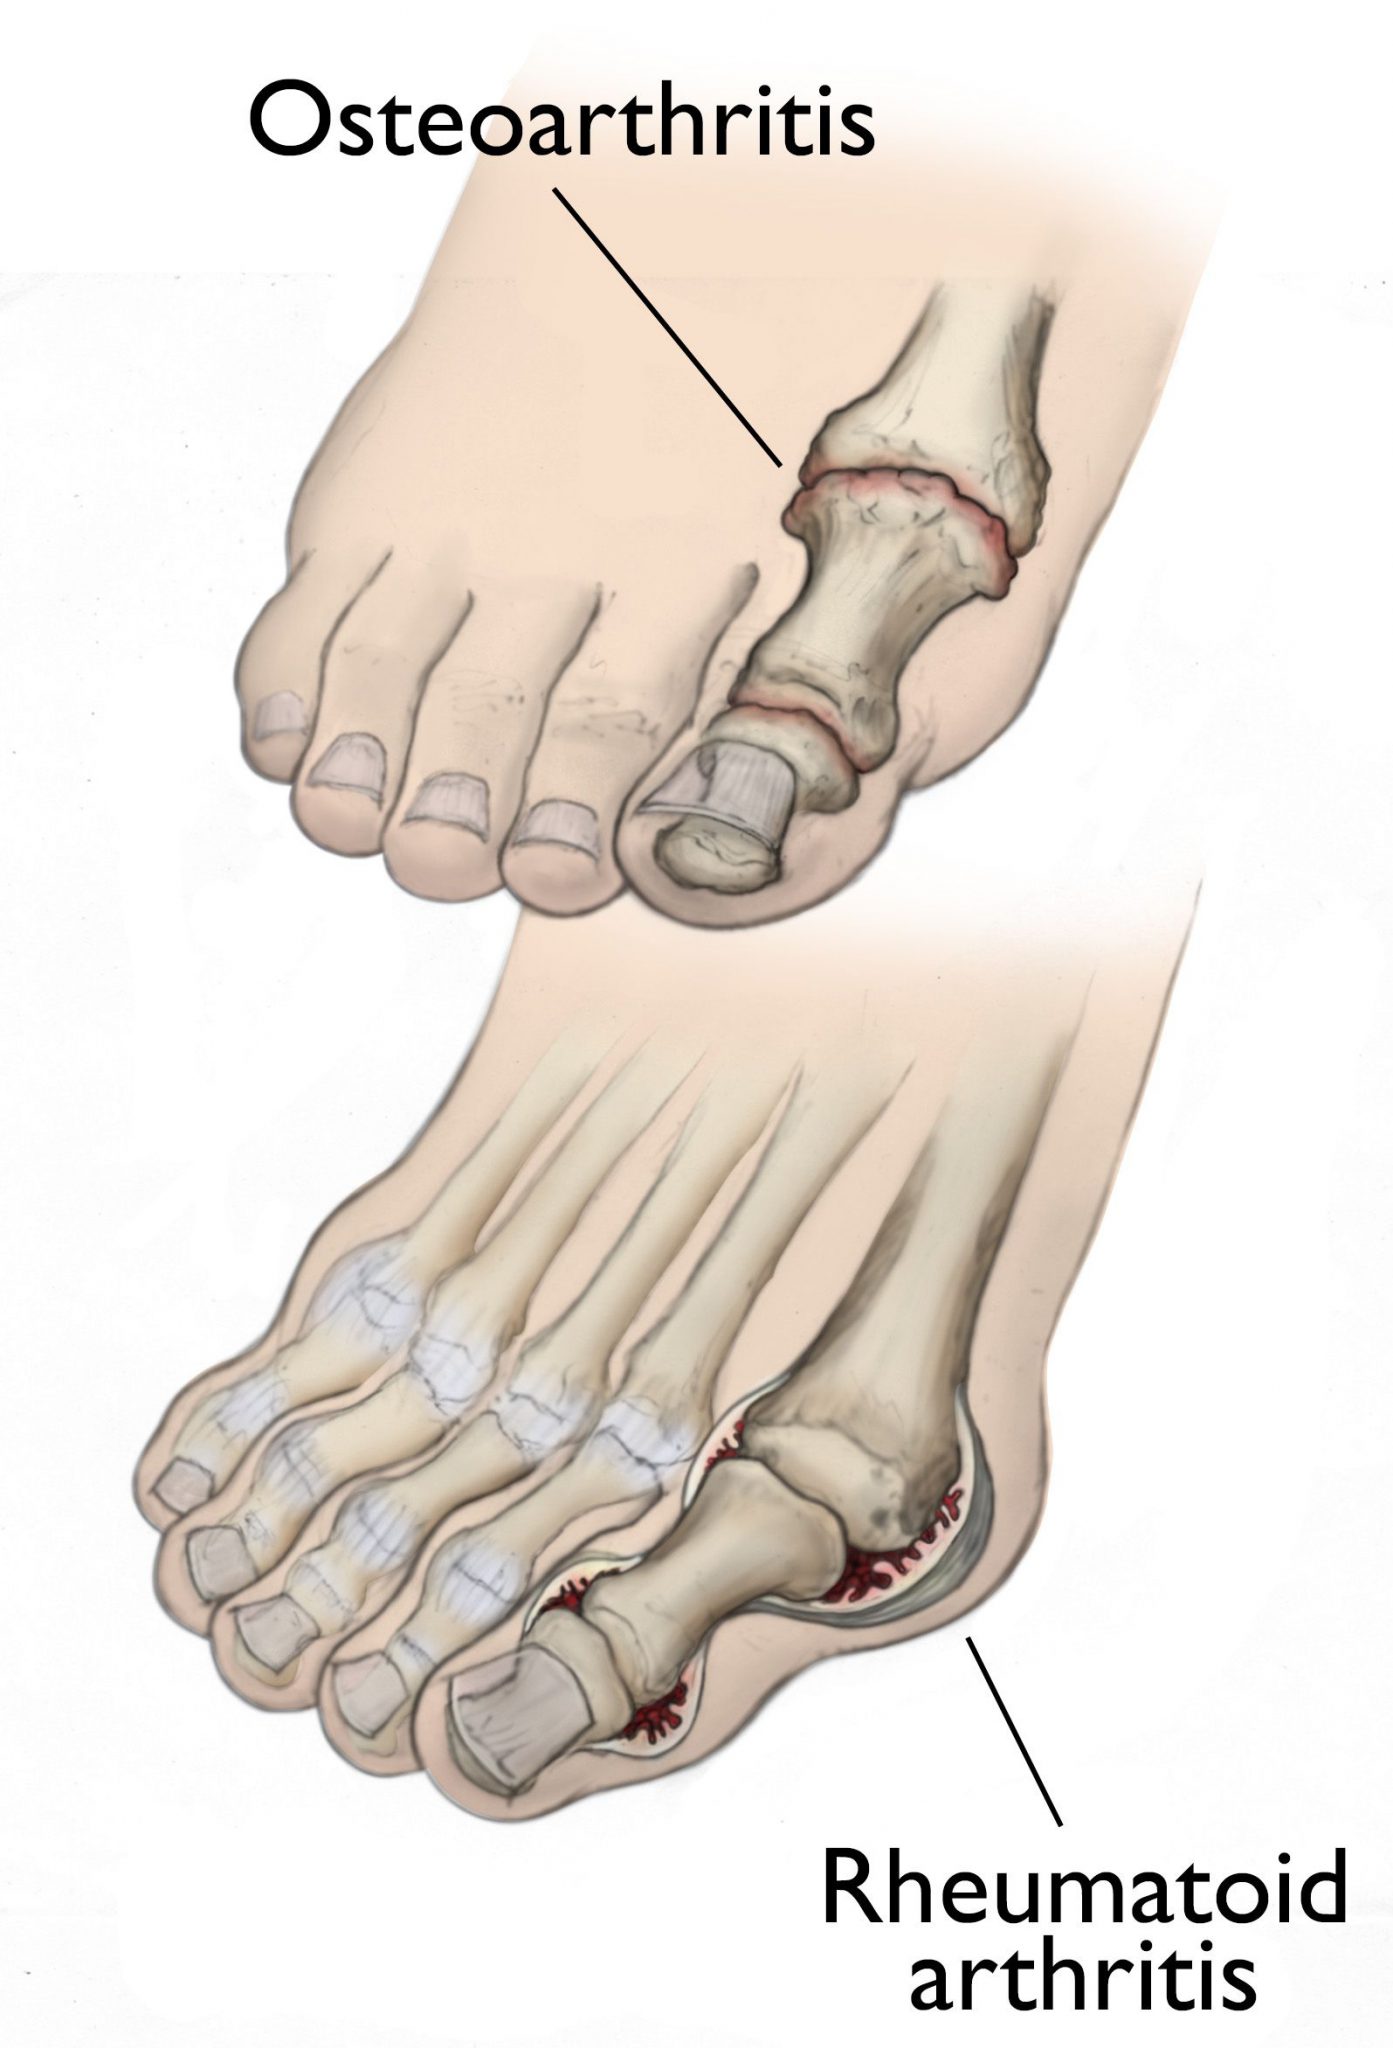 Psoriatic Arthritis Feet Archives Deniel Foot And Ankle Center